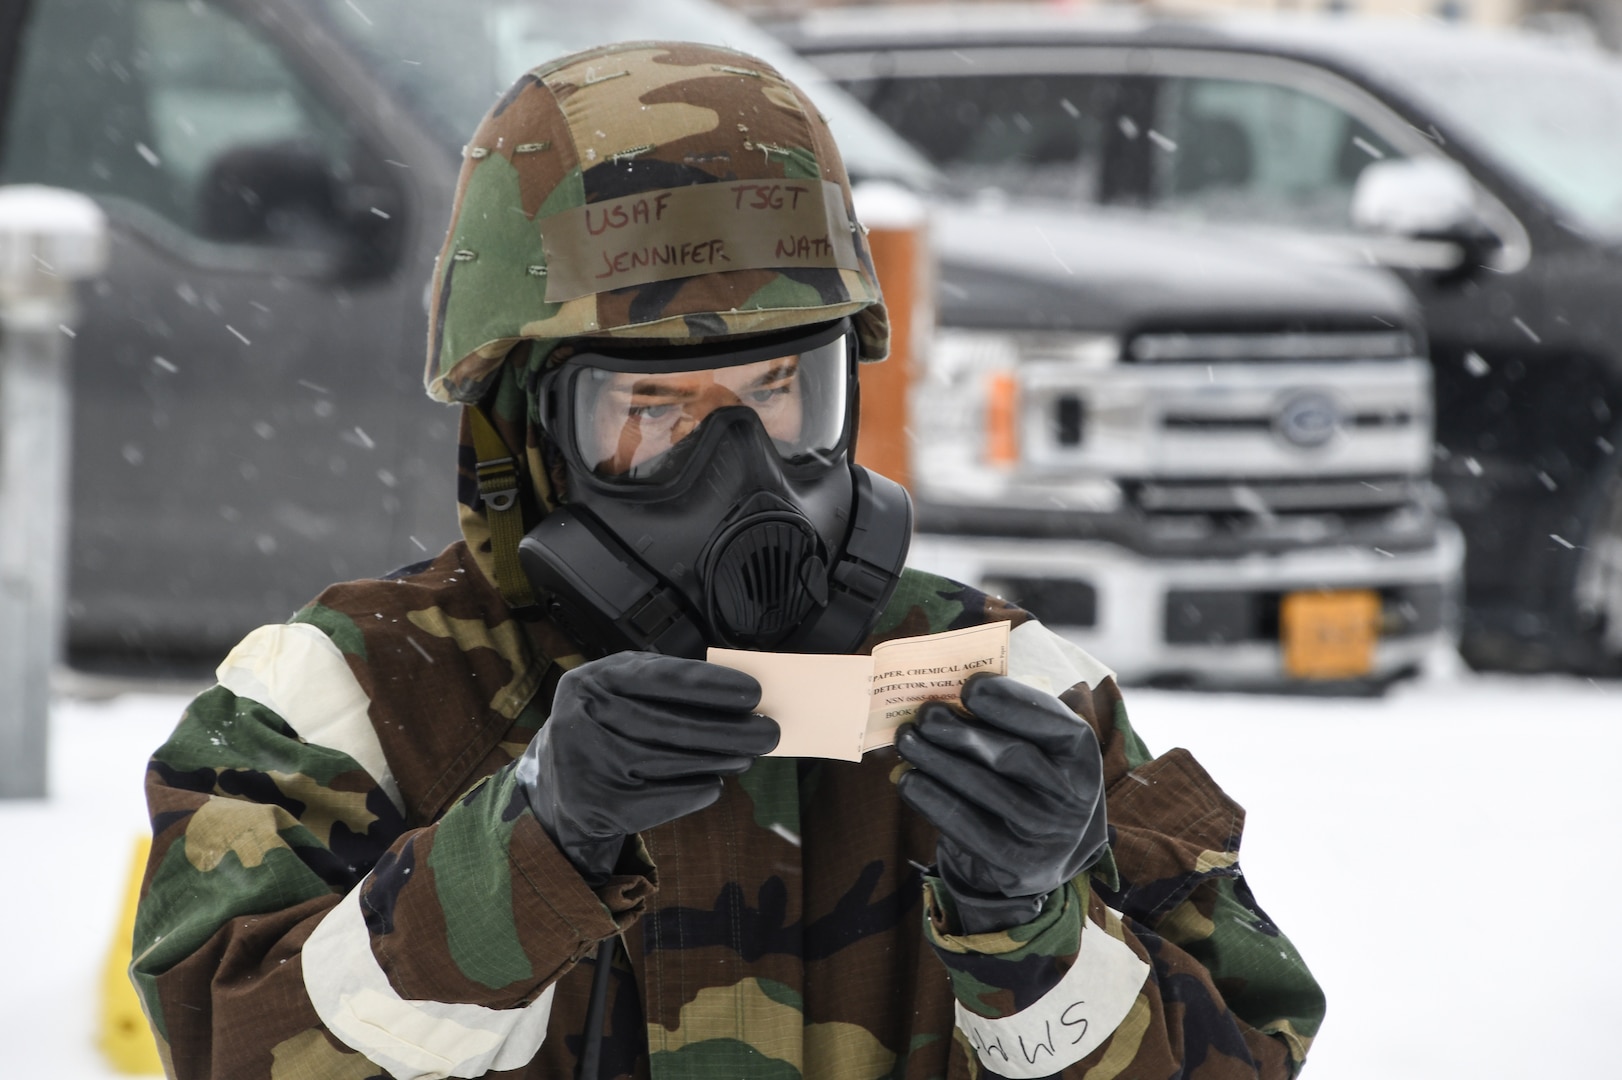 Tech. Sgt. Jennifer Nath of the 168th Wing Force Support Squadron simulates inspecting M8 paper and reporting observations in a CBRN environment at Eielson Air Force Base, Alaska, Nov. 4, 2022. Nath was part of a post-attack reconnaissance team during the Golden Raven 23-1 exercise.